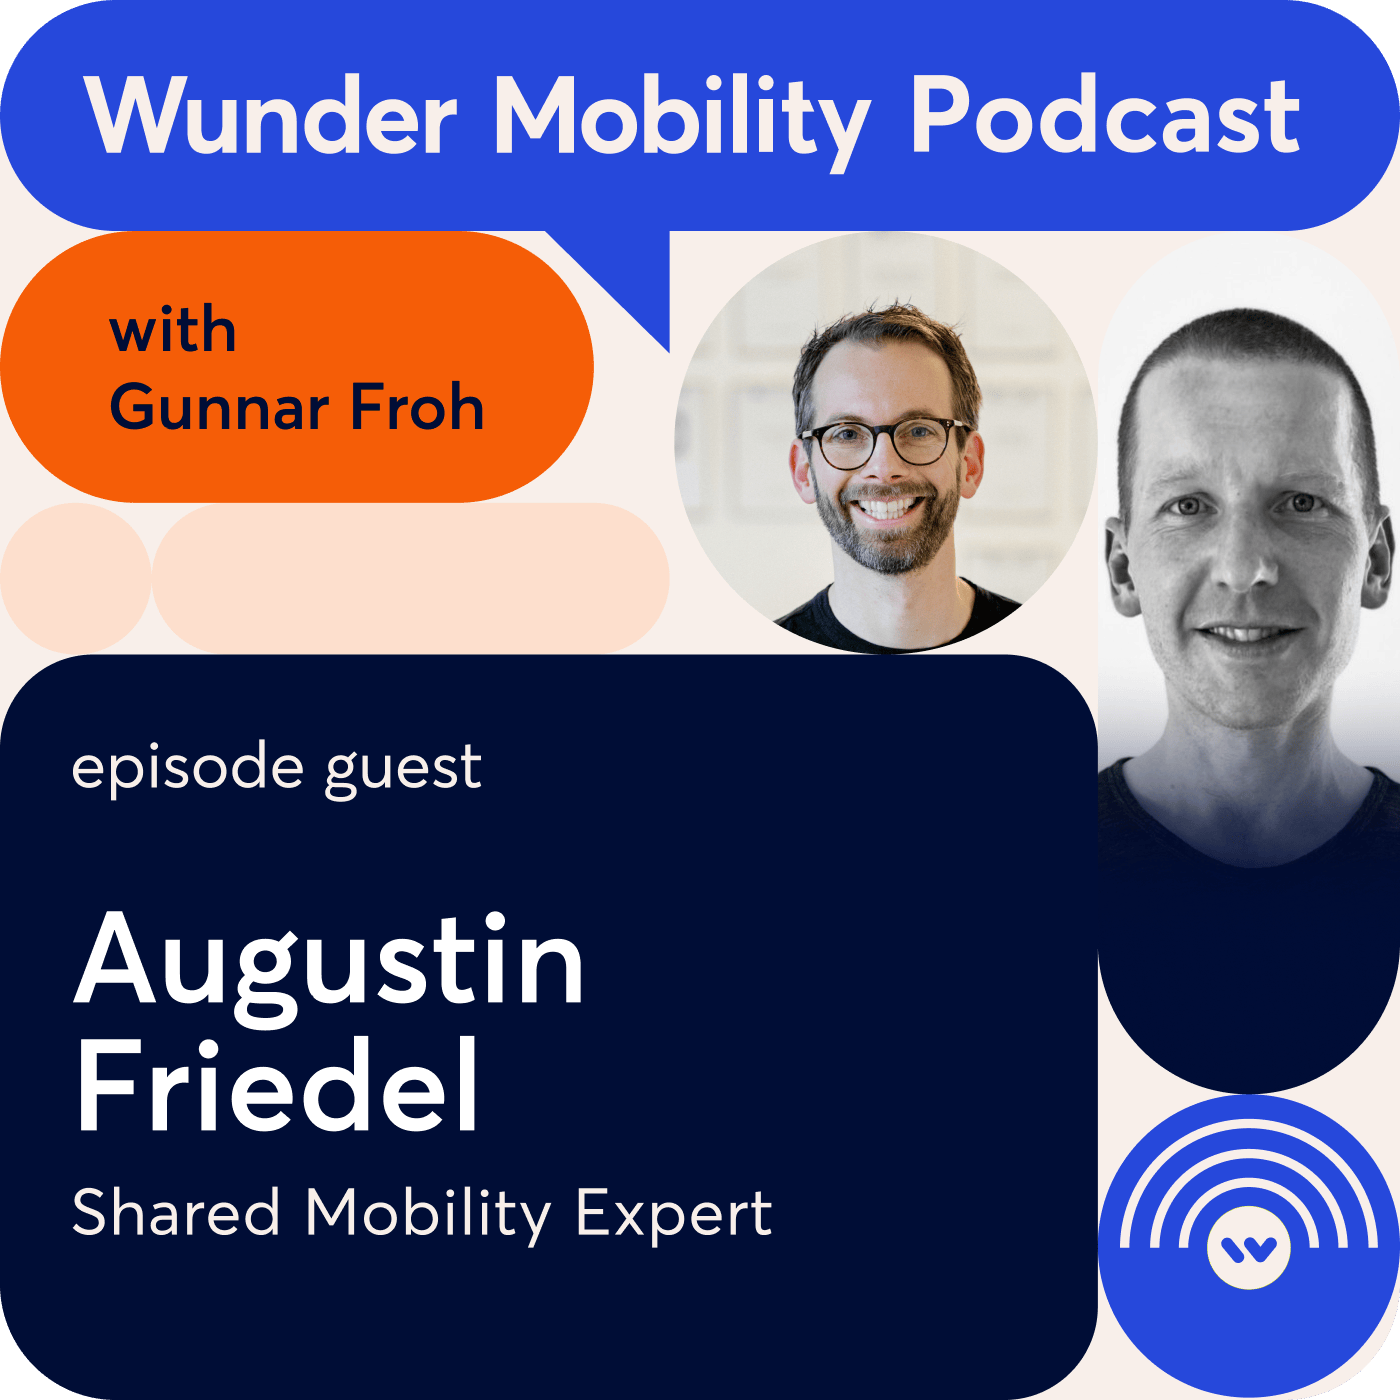 #40 Augustin Friedel, Shared Mobility Expert